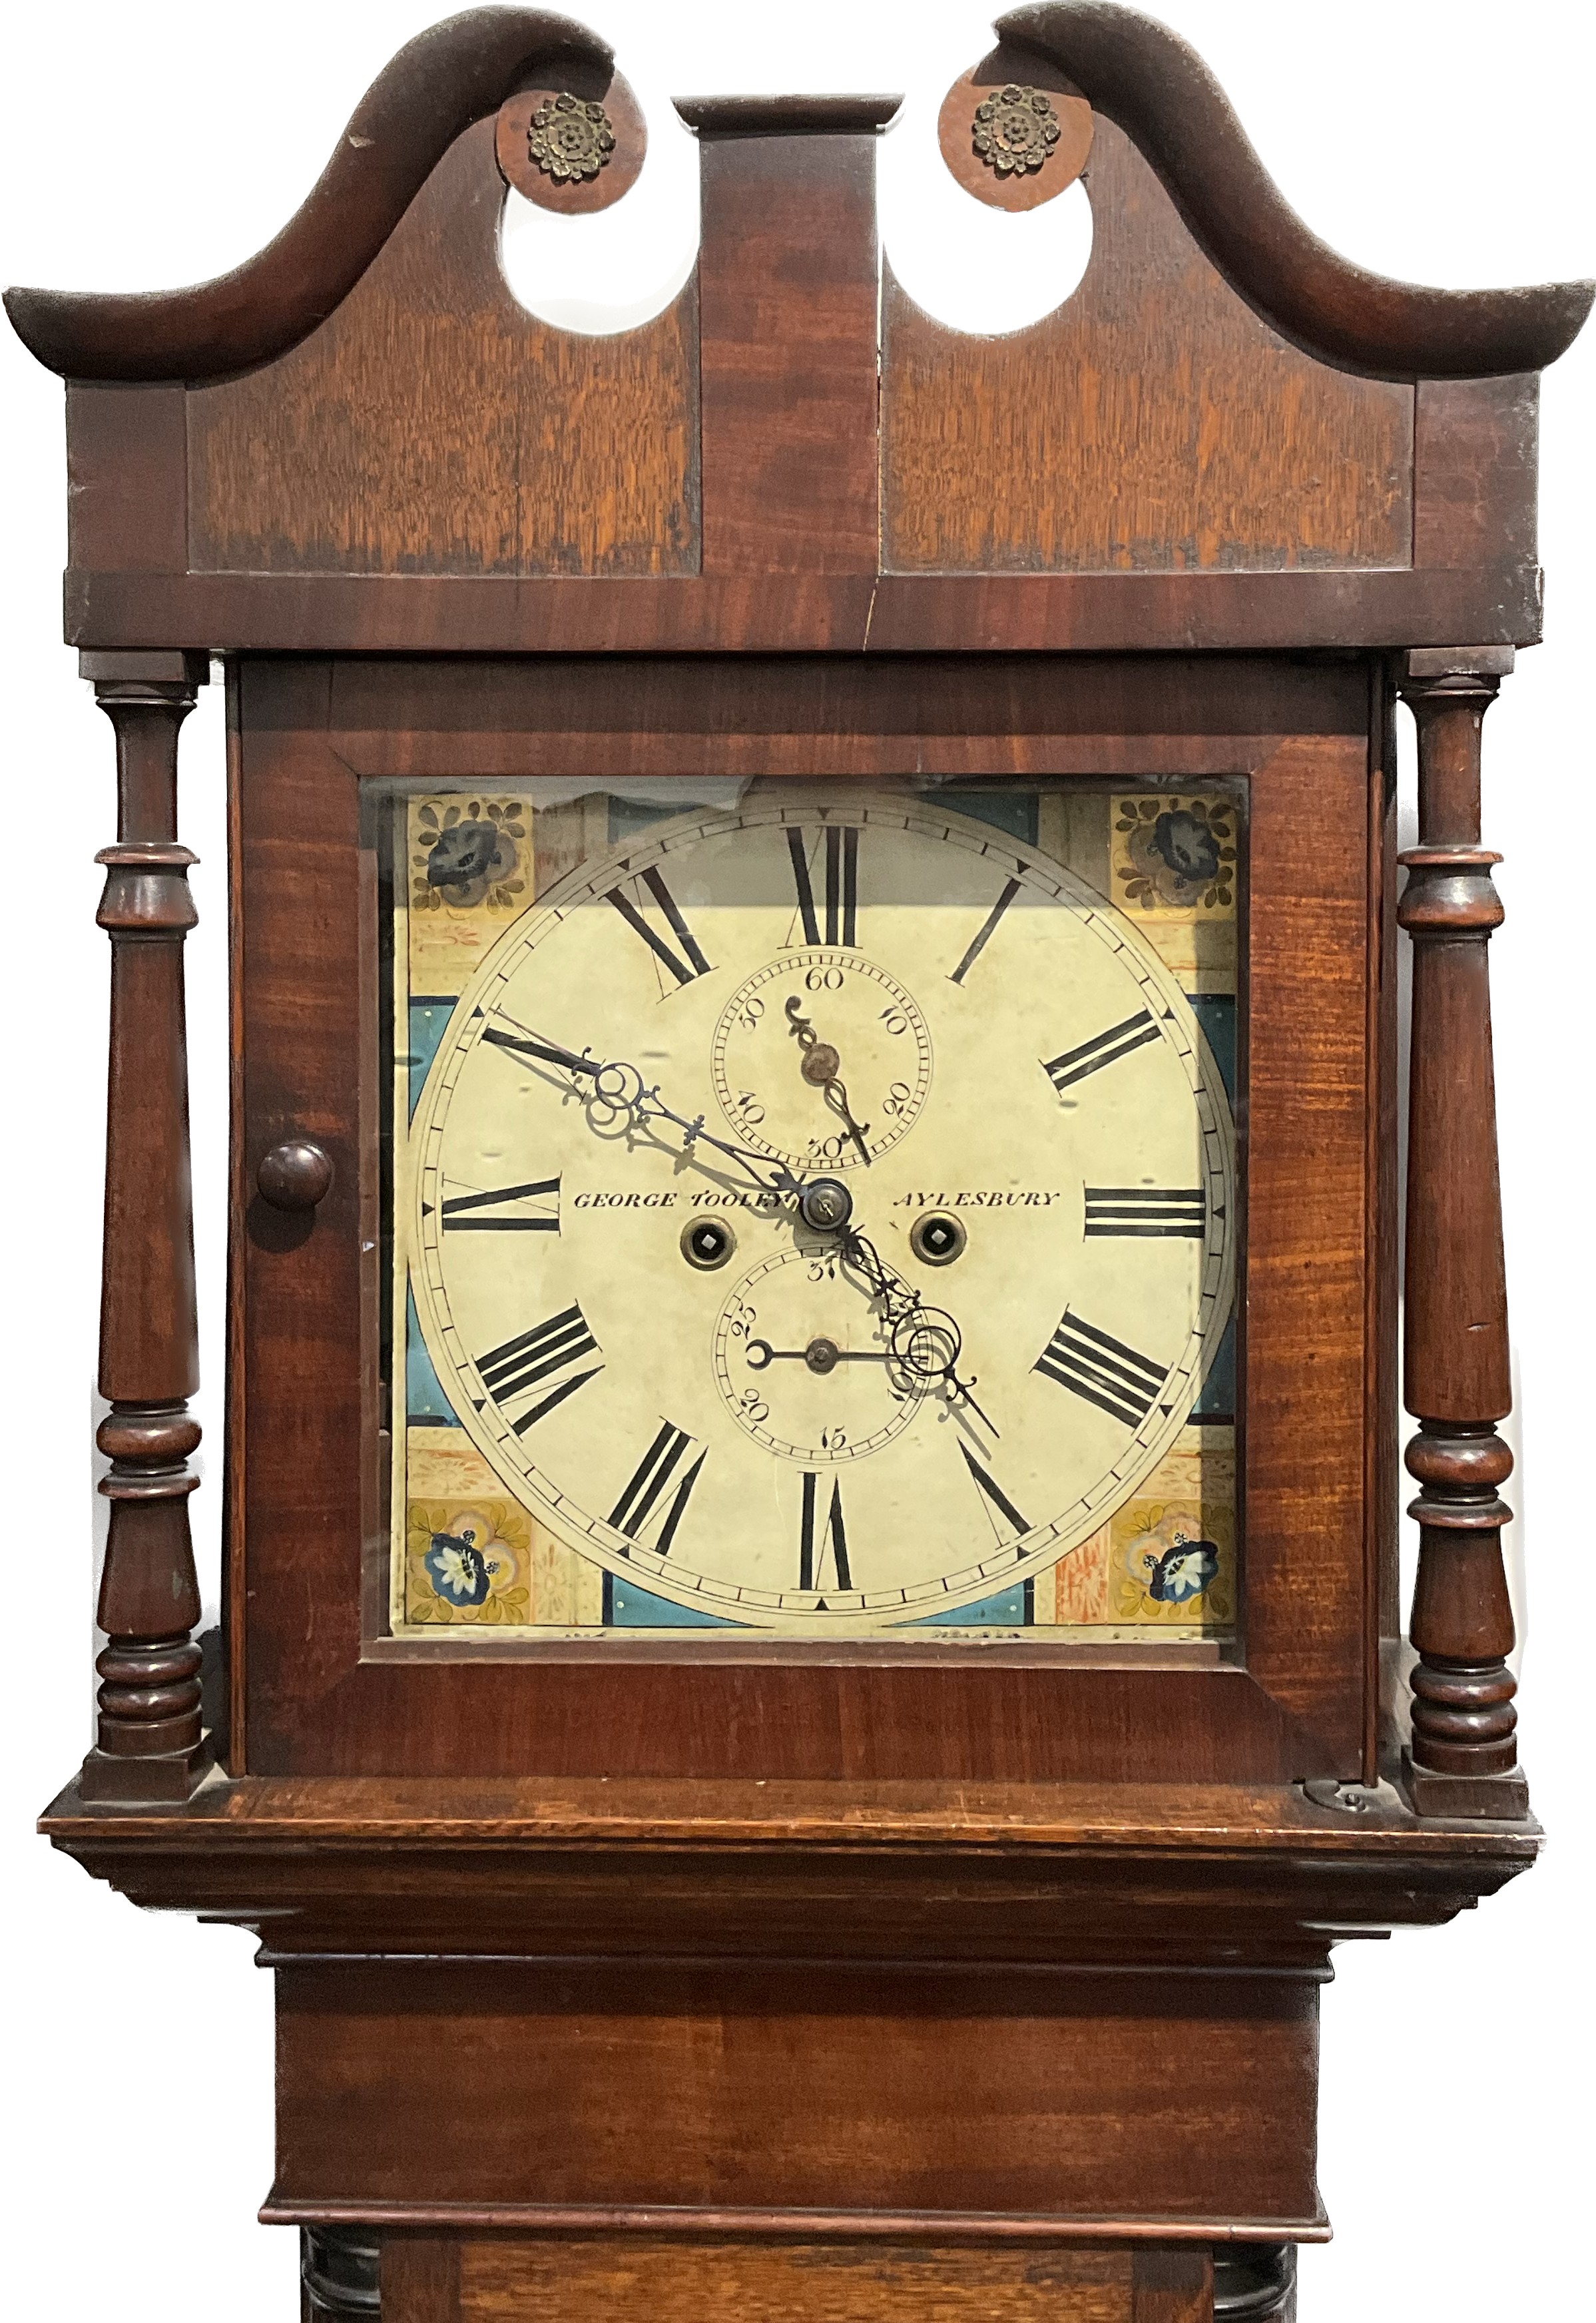 A George Tooley of Aylesbury mahogany cased long case clock, floral painted dial with Roman